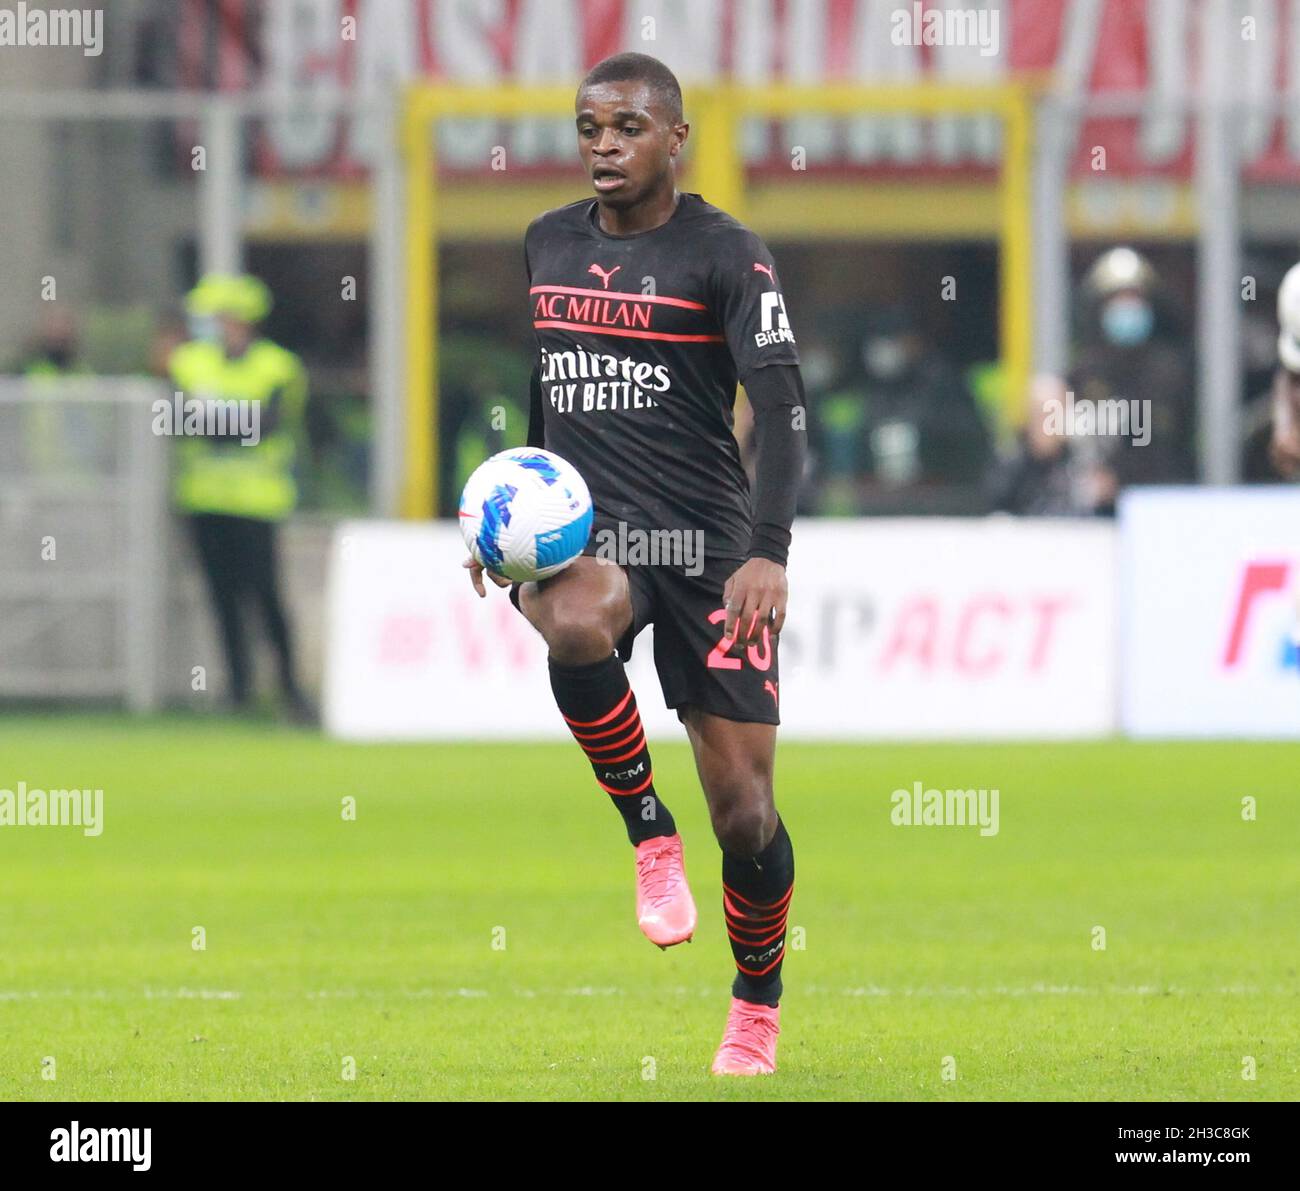 MILAN ITALY- October 26 Stadio G Meazza  Pierre Kalulu  / Defender in acton during the Serie A match between Ac Milan and Fc Torino  at Stadio G. Meazza on October 26, 2021 in Milan, Italy. Stock Photo